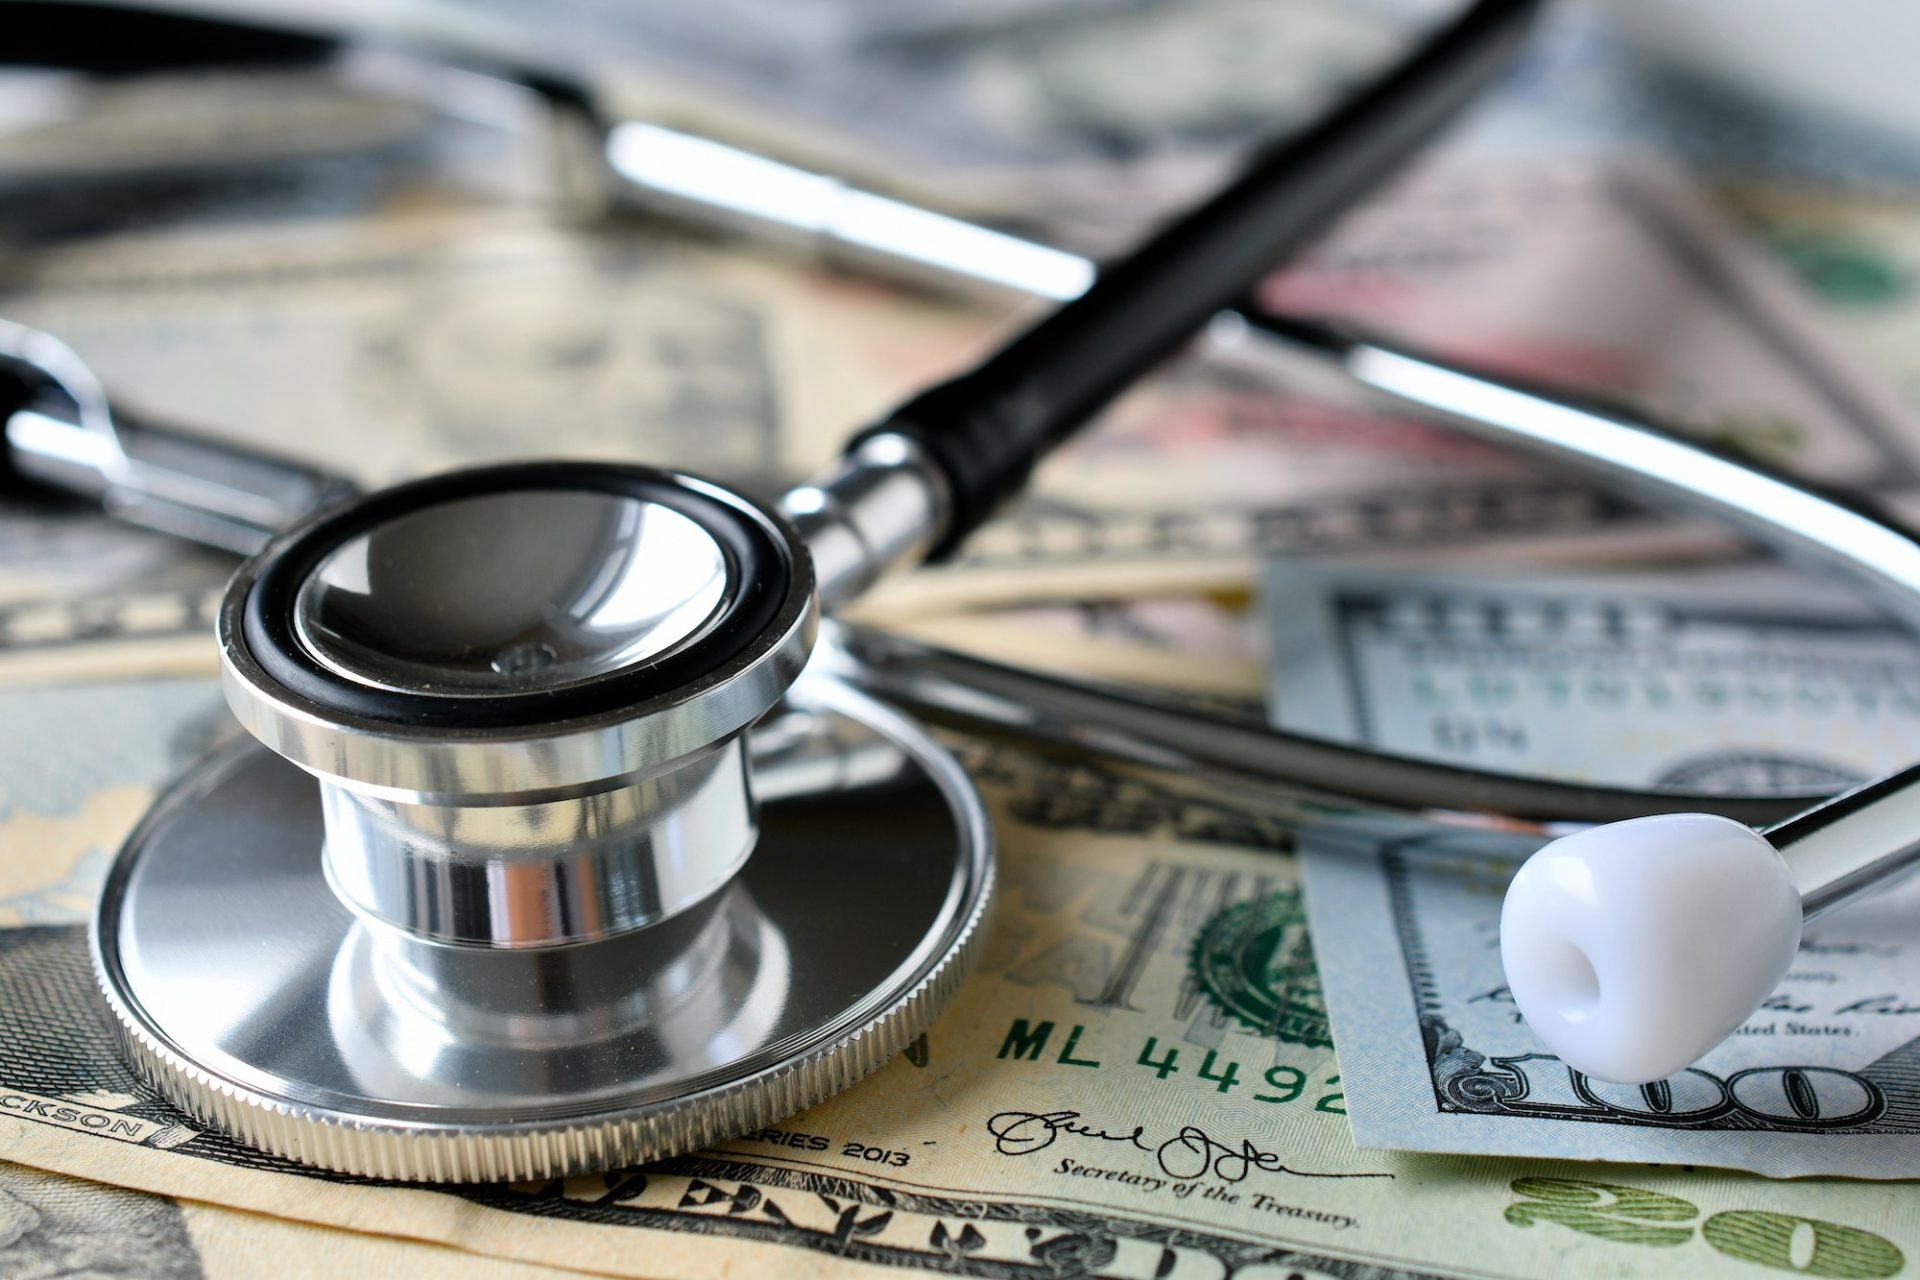 A stethoscope laying on money - the high cost of insurance. Paying healthcare expenses